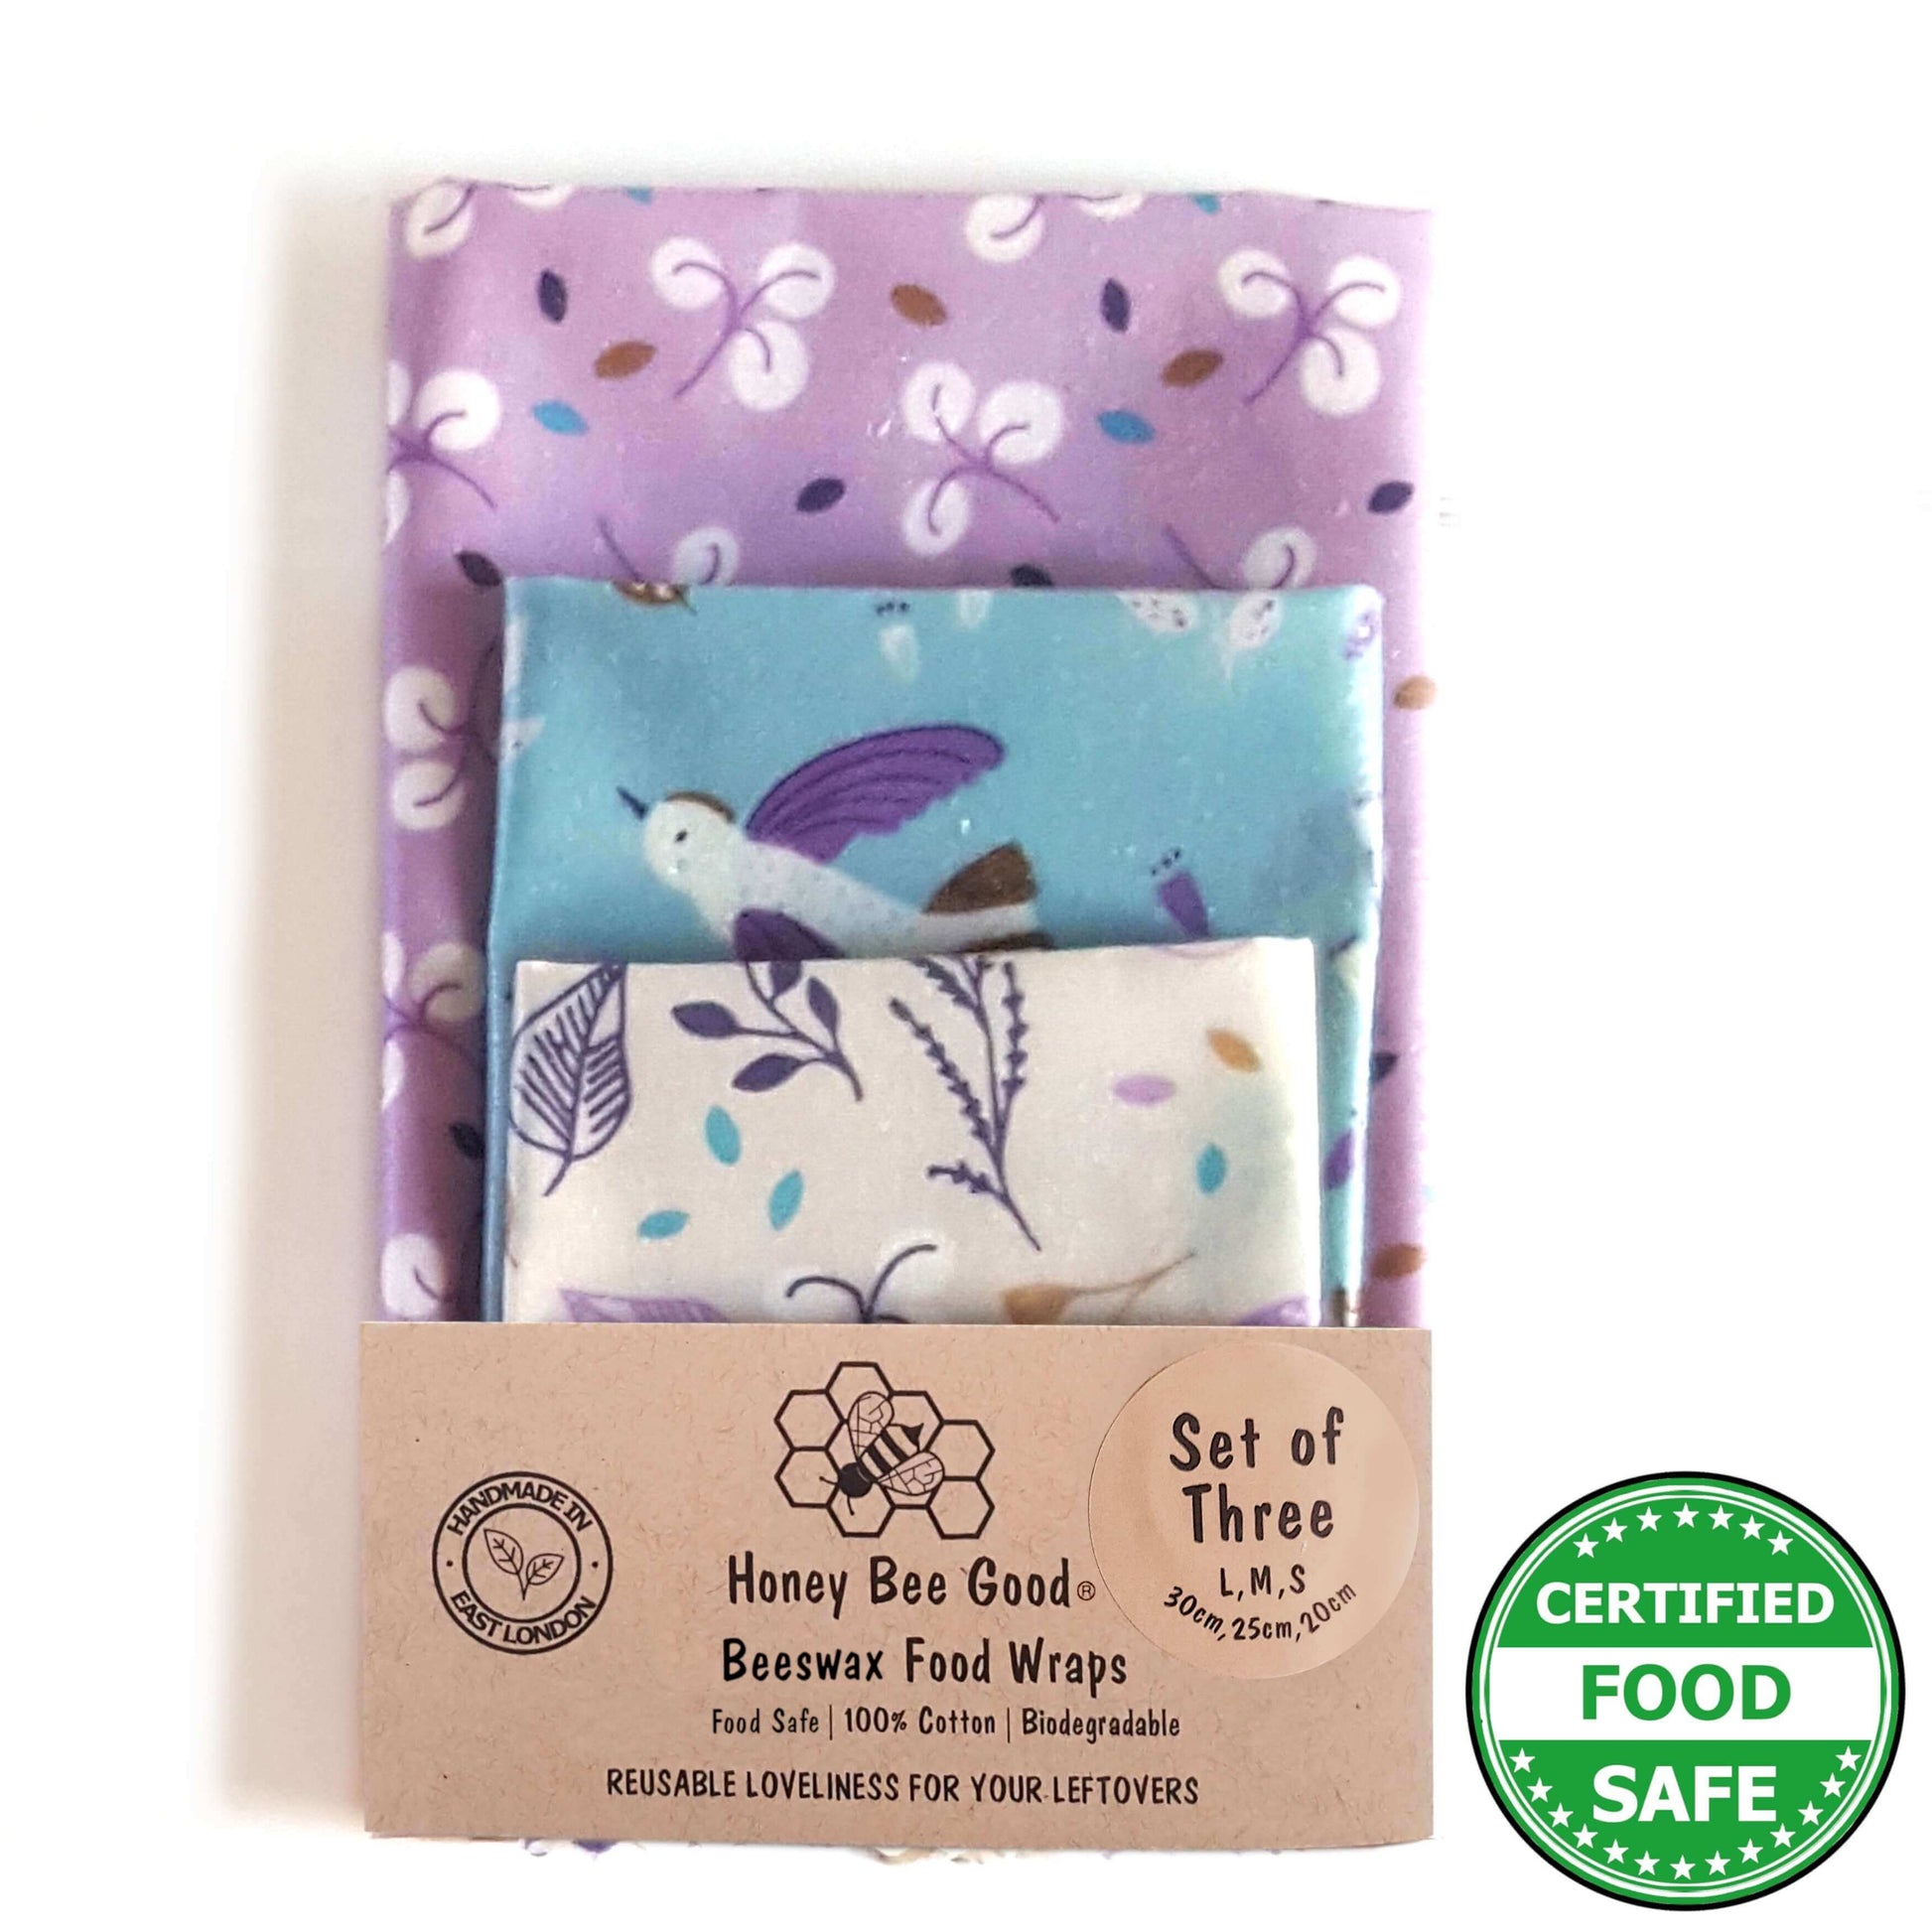 Reusable Beeswax Food Wraps 100% Hand Made in the UK by Honey Bee Good shown in Set of 3 Heritage Love Birds pattern